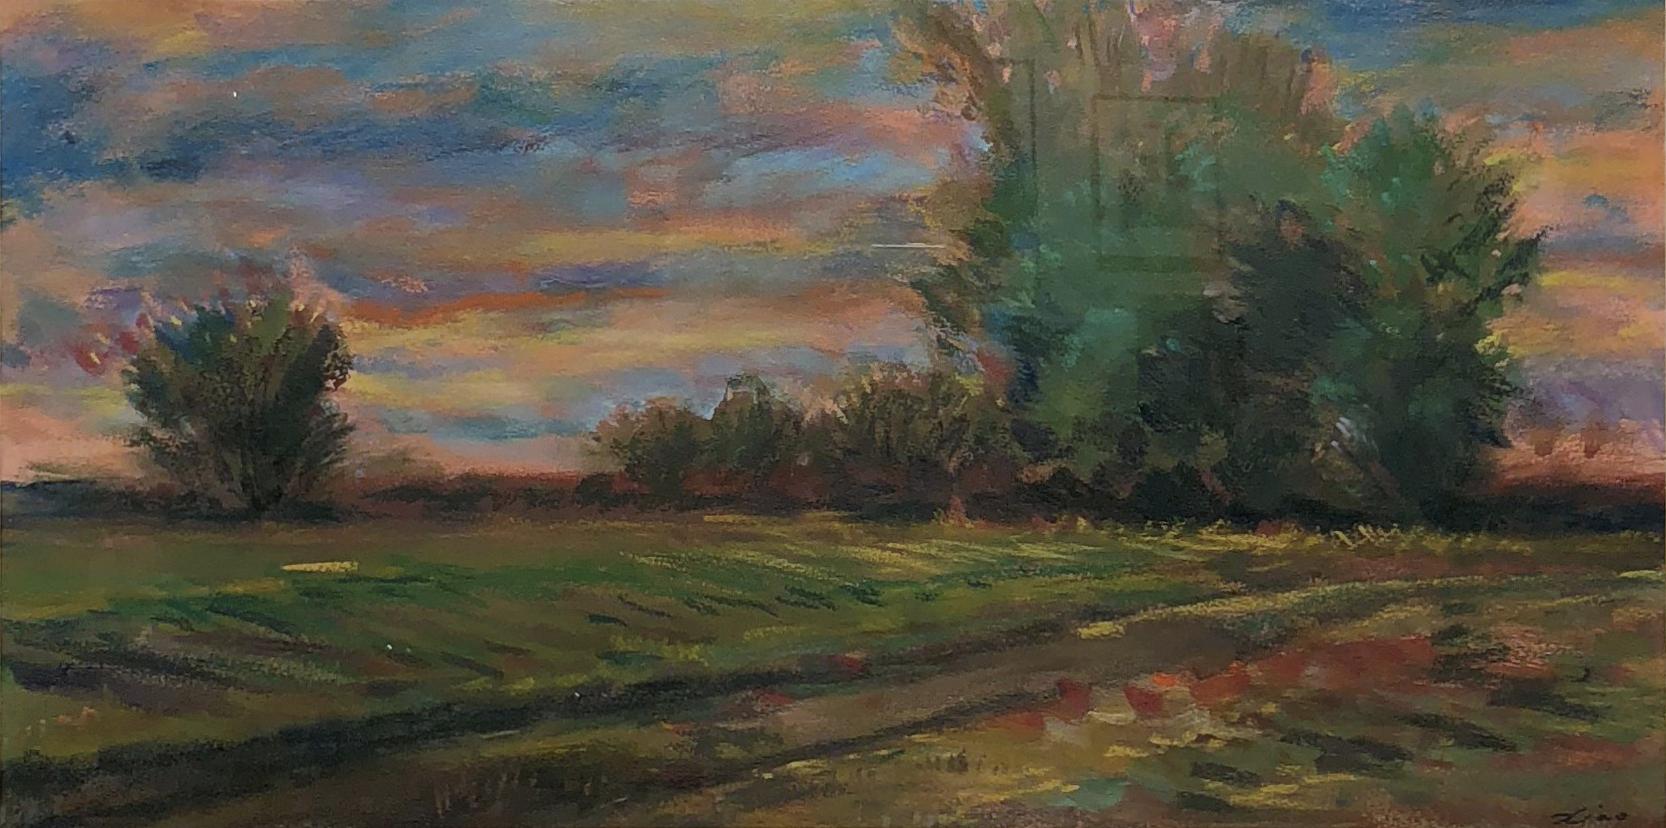 Hand-Painted Golden Hued Landscape, Soft Pastel on Paper, Rural Scene with Tree Bank and Sky For Sale